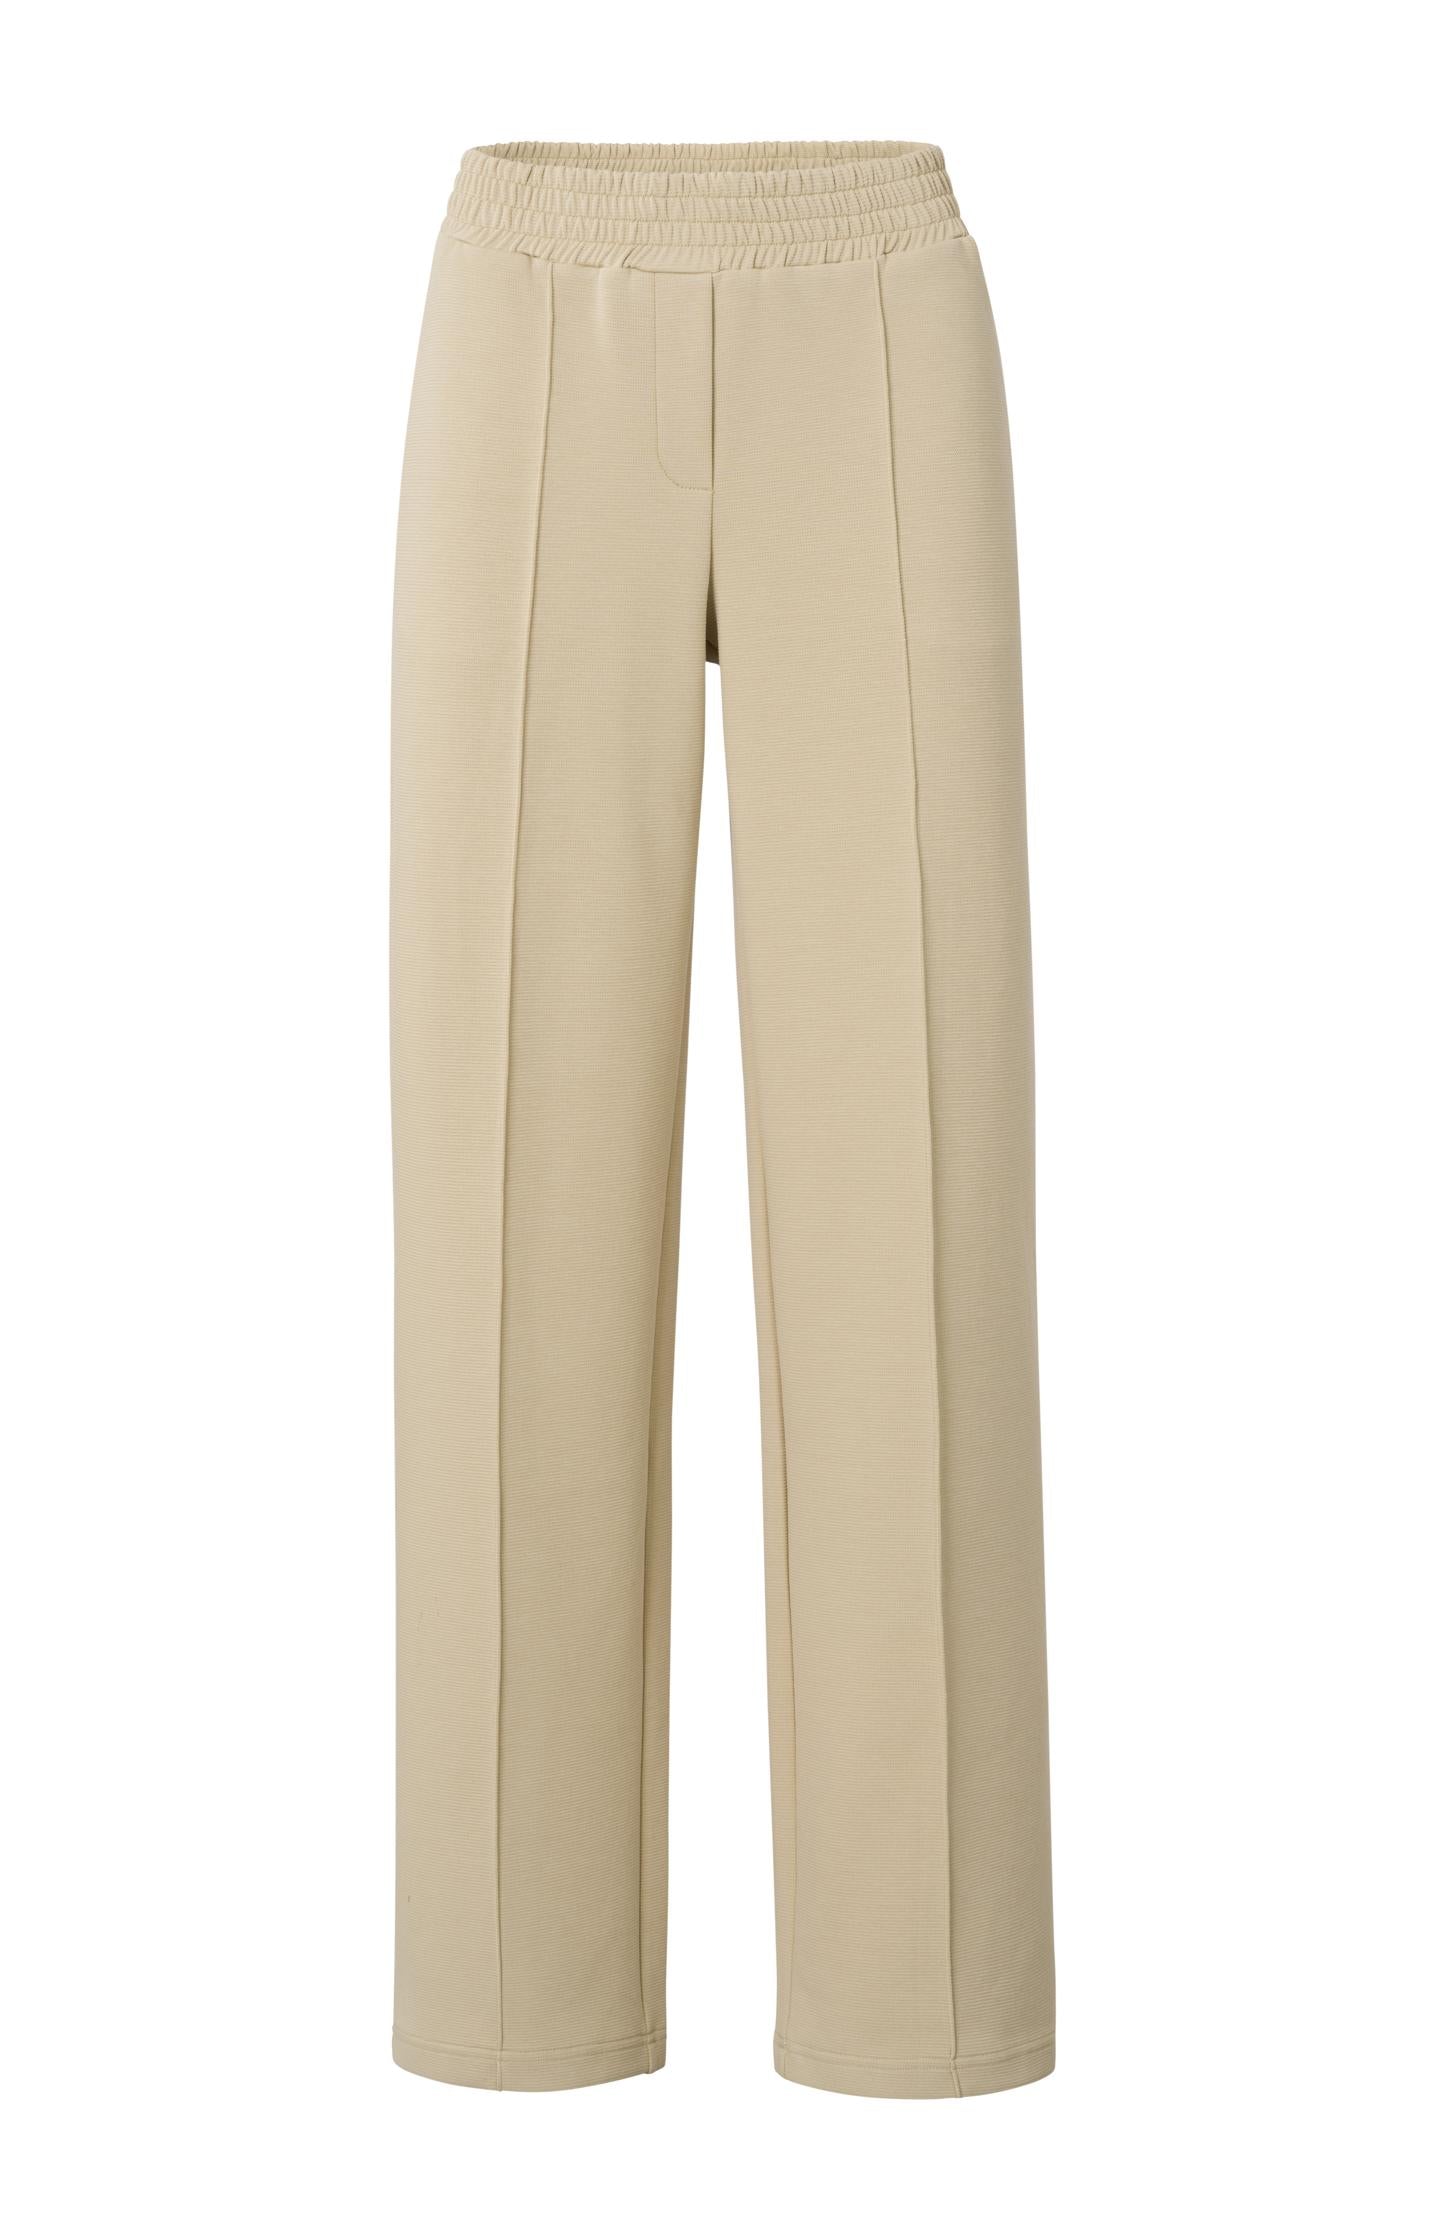 Jersey wide leg trousers with elastic waist and seam details - Type: product